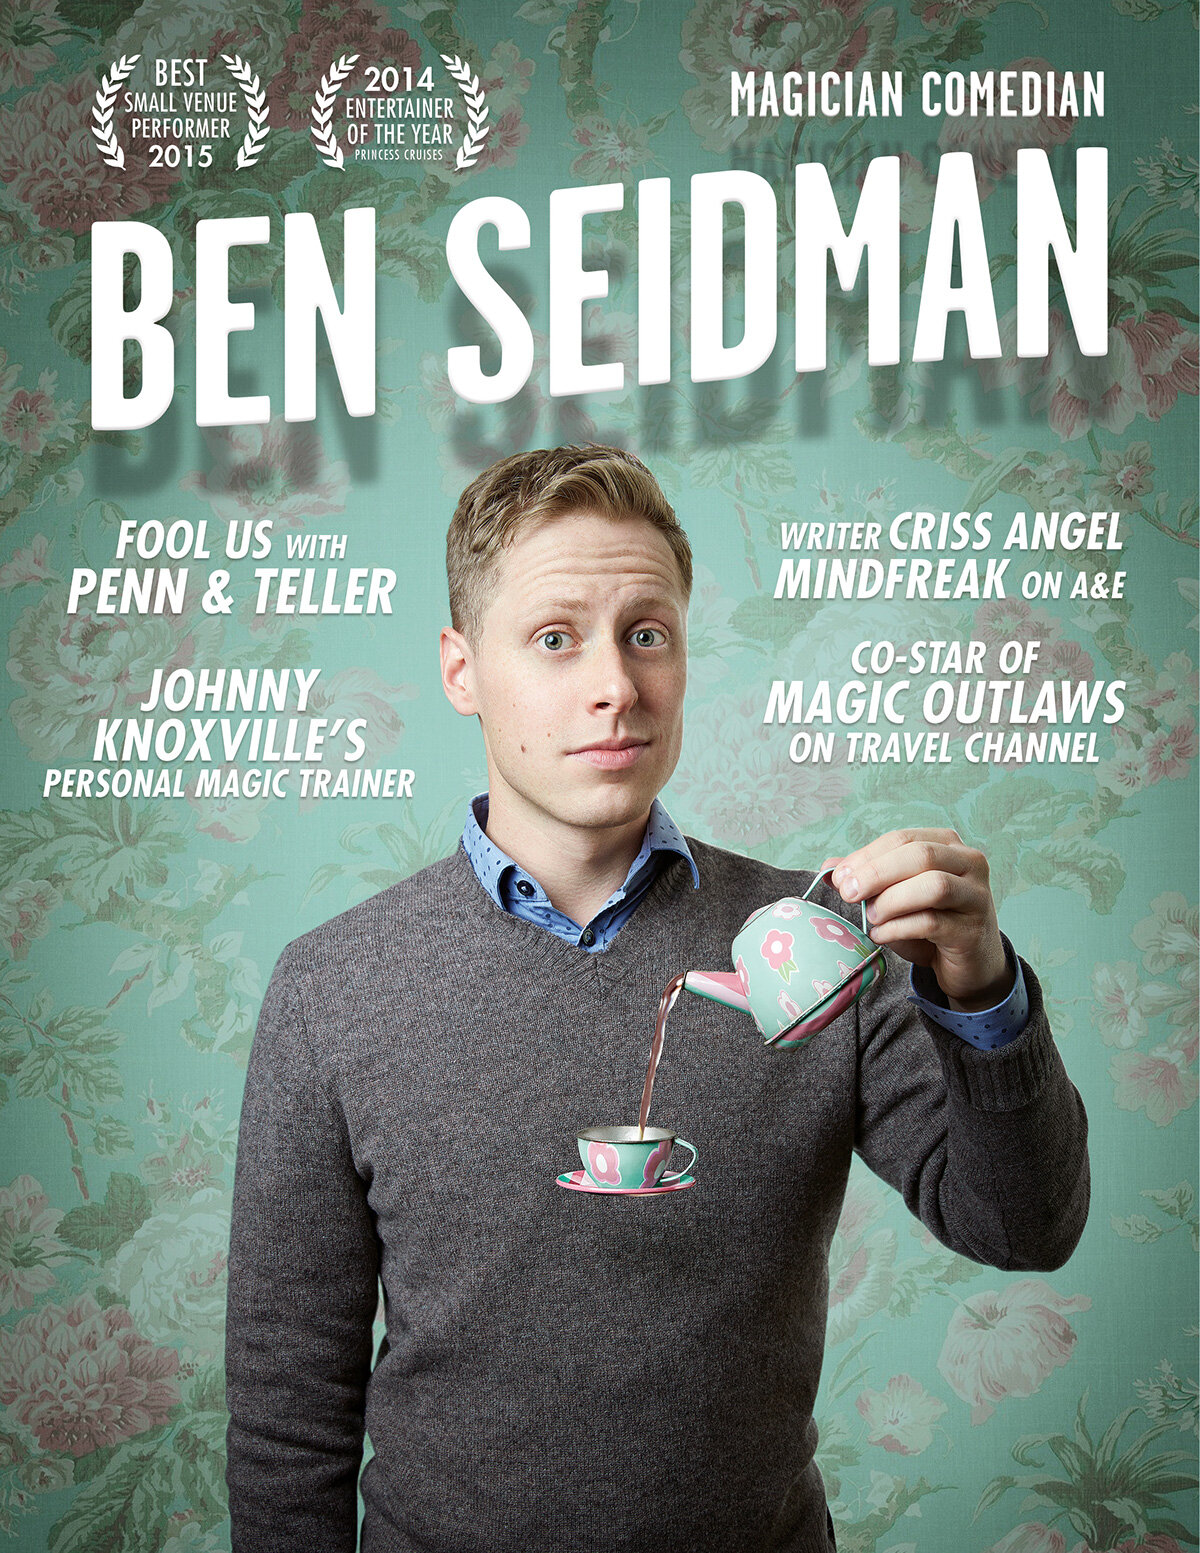 quirky entertainer portrait of comedy magician Ben Seidman pouring tea into a magically hovering teacup for poster